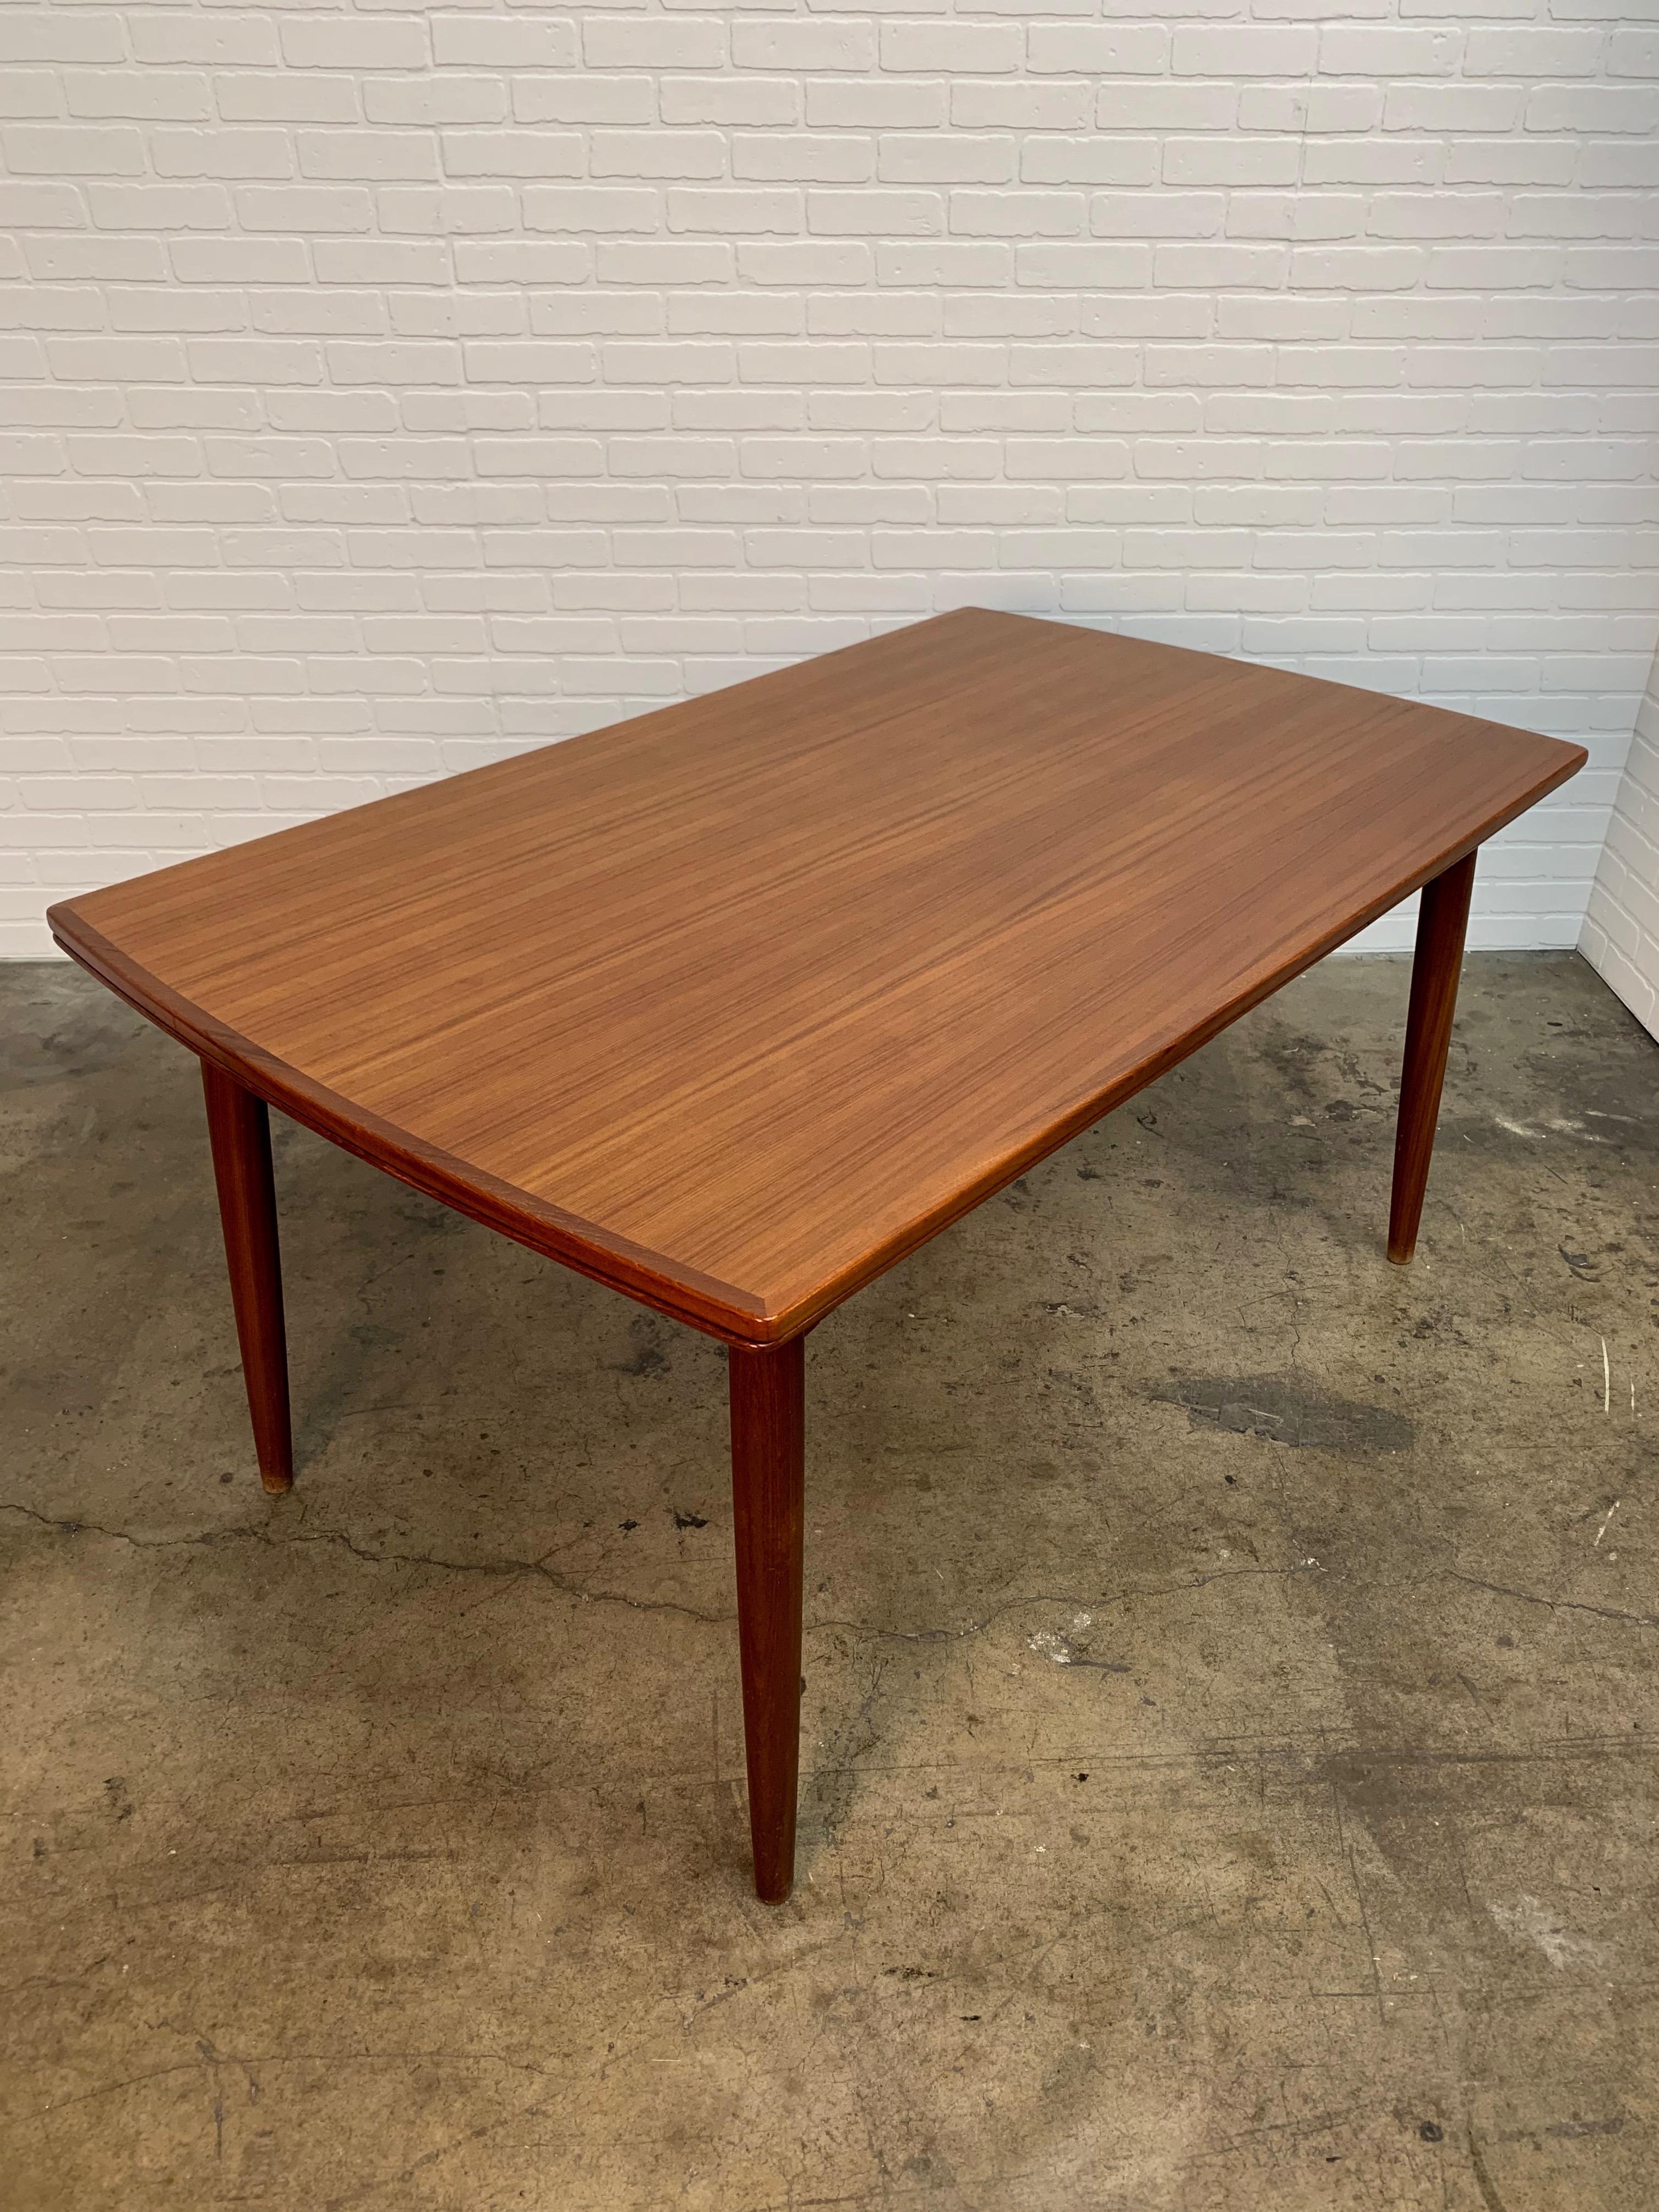 Teak dining table with retractable leaves in very good original condition
Table measures 57.25